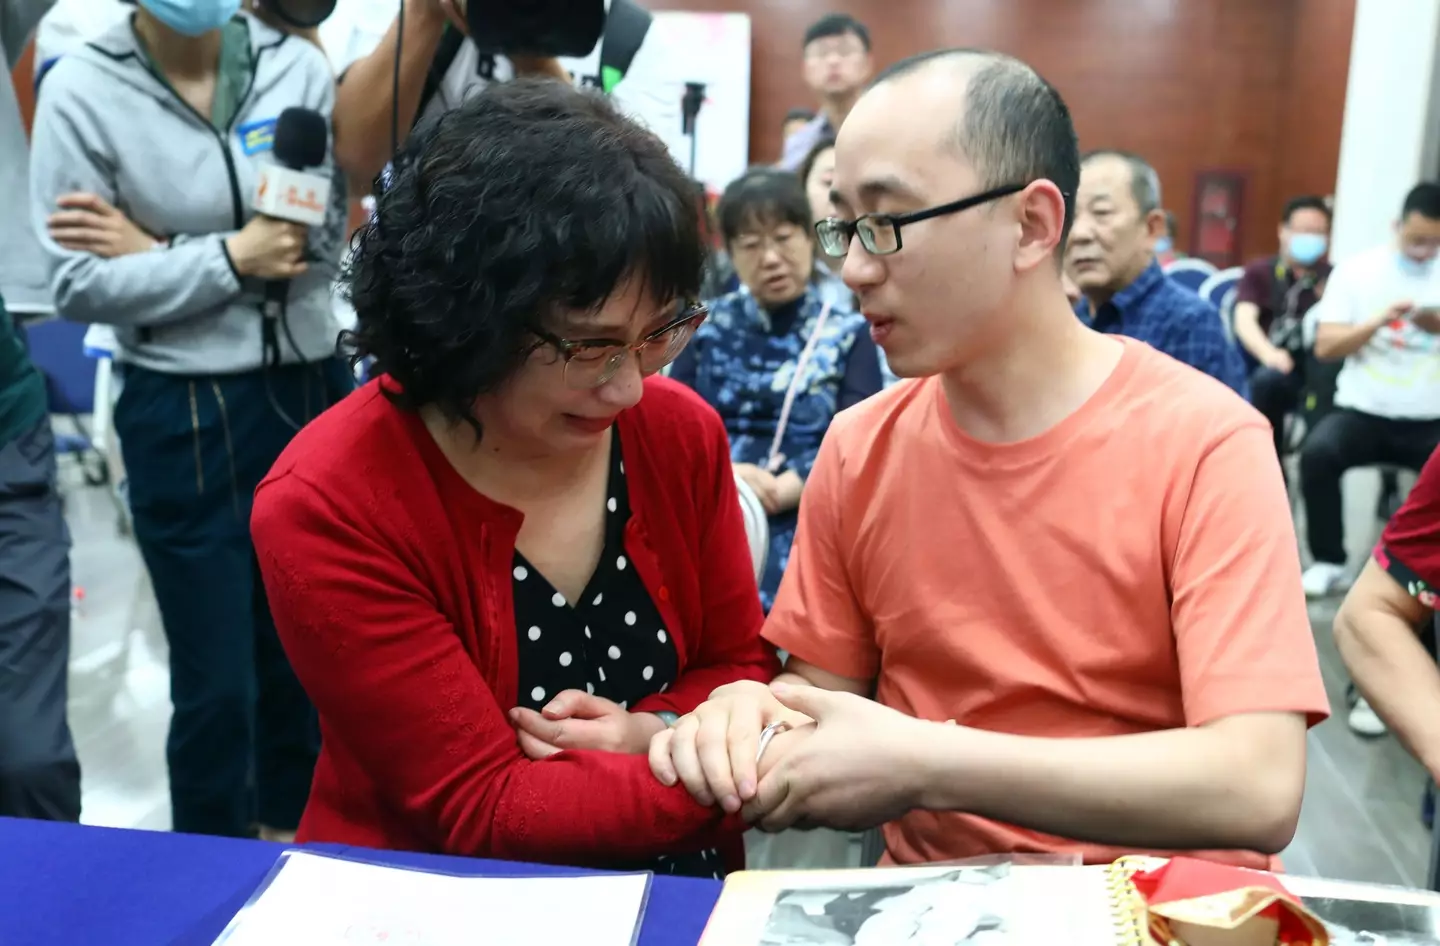 It took 32 years for Mao Yin and Li Jingzhi to be together again.